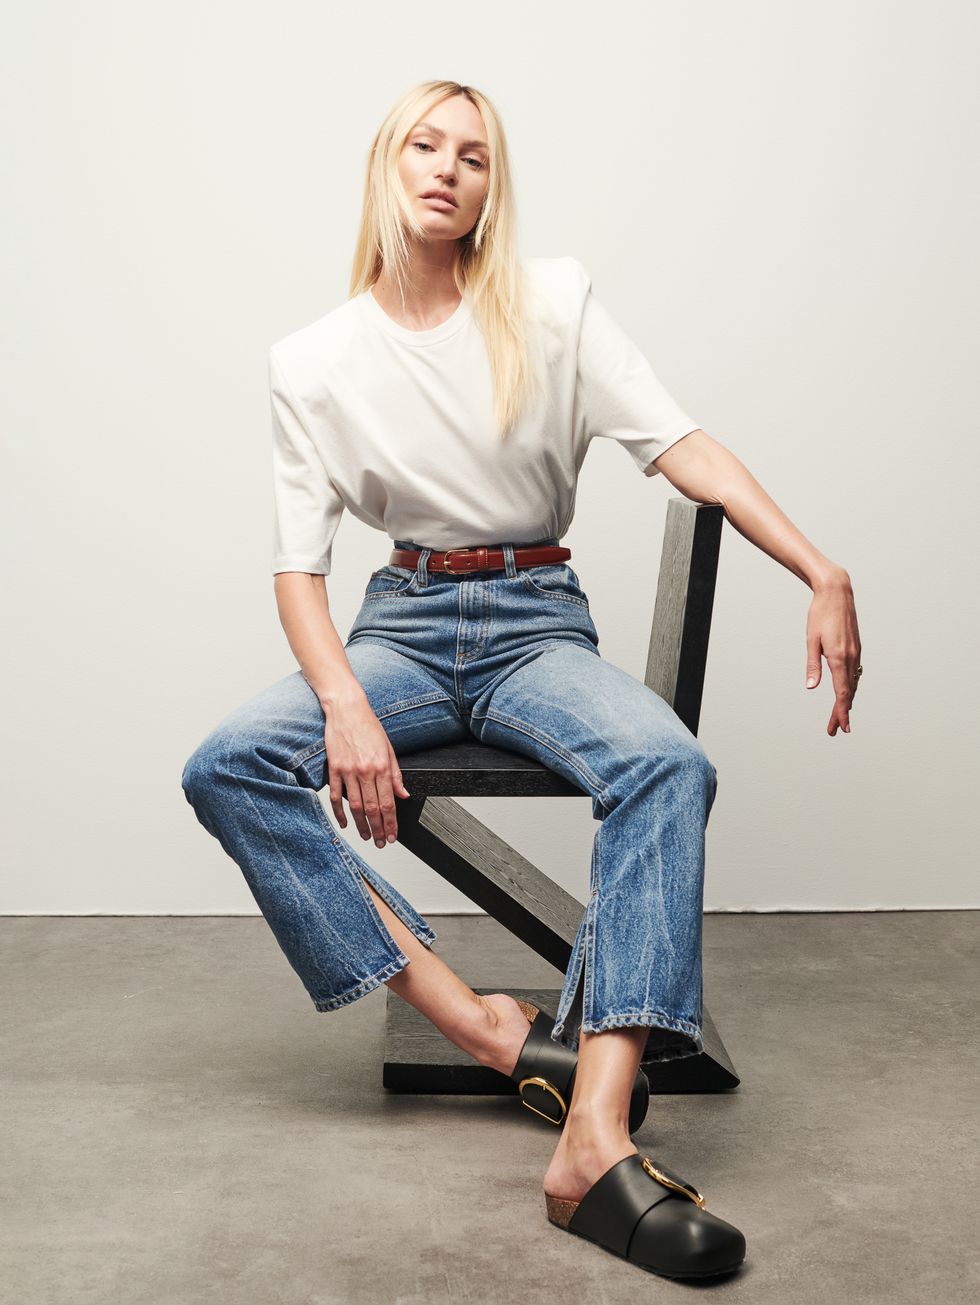 candice swanepoel jeans 2022 candice swanepoel dl1961 campaign